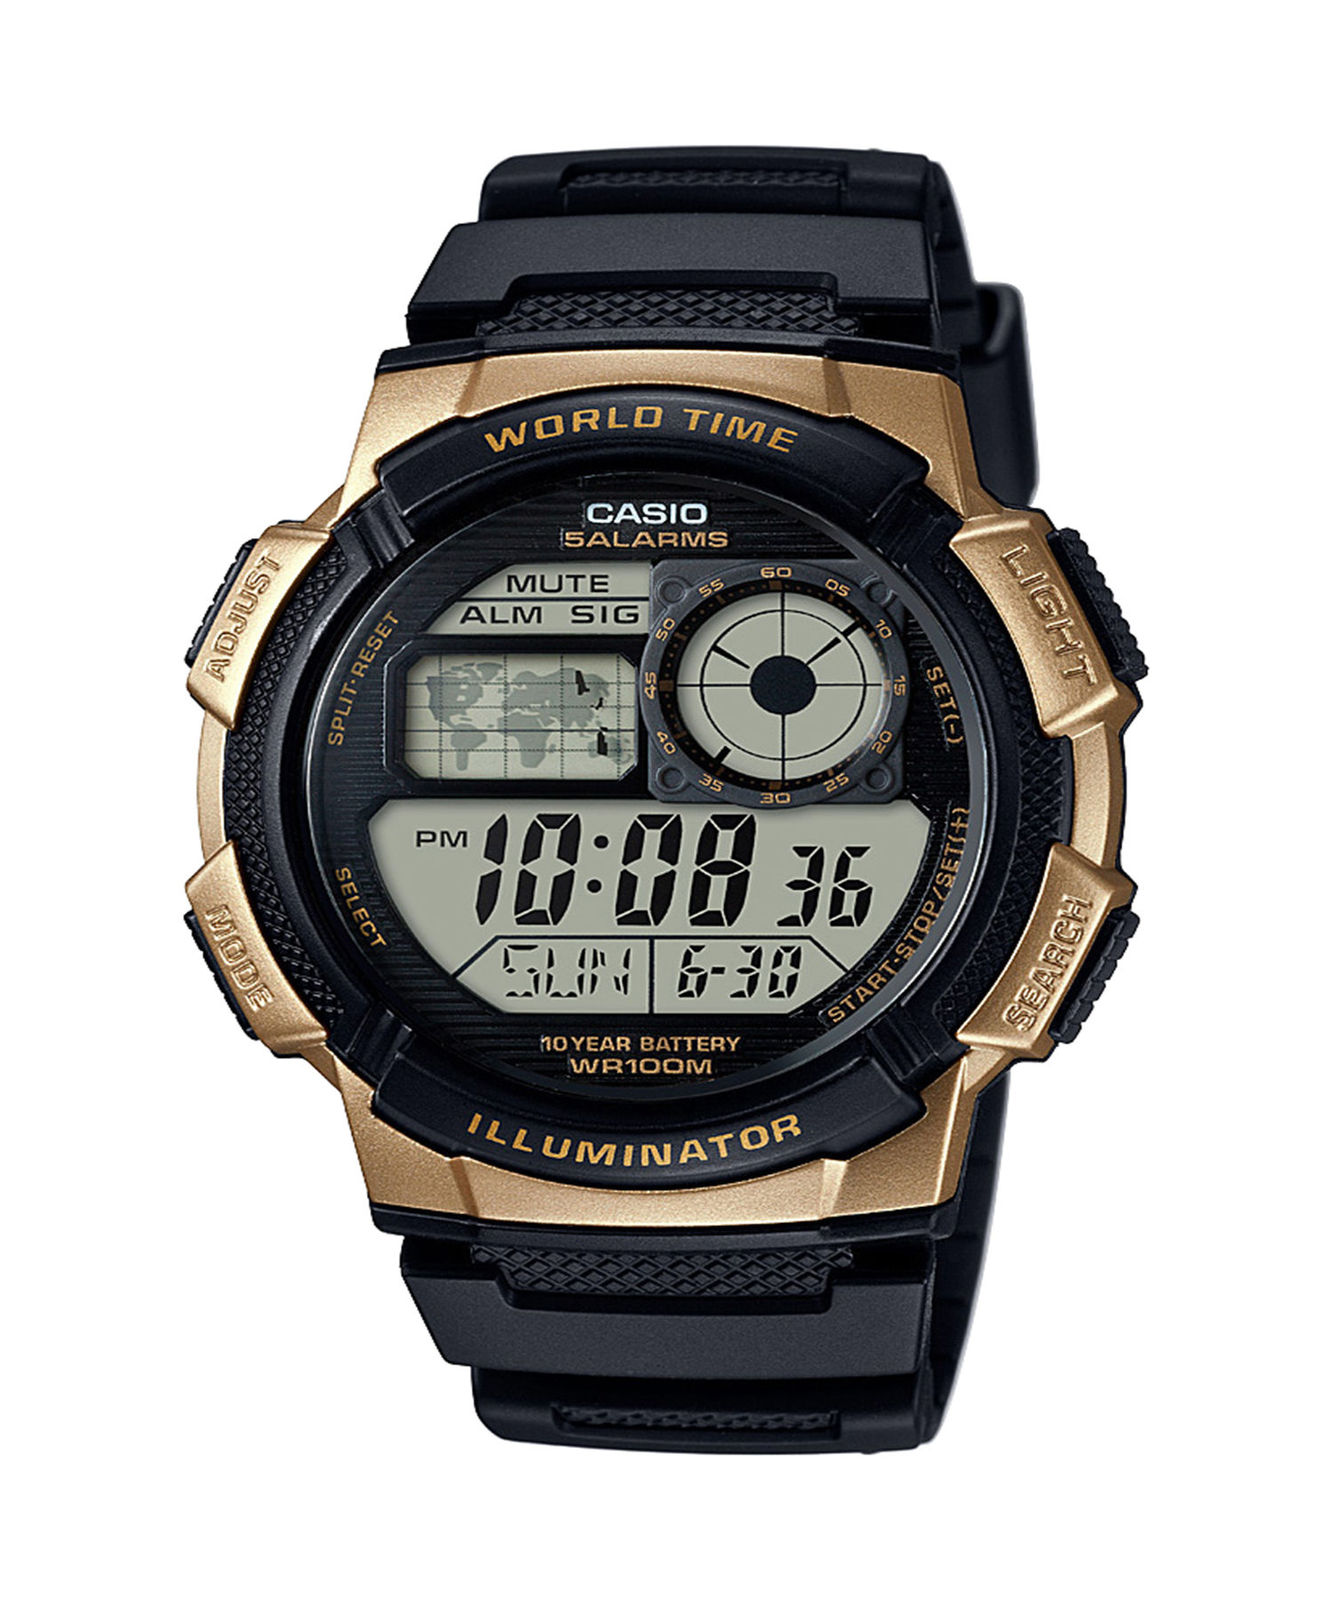 Casio Men's '10 Year Battery' Quartz Stainless Steel and Resin Watch, Color Blac